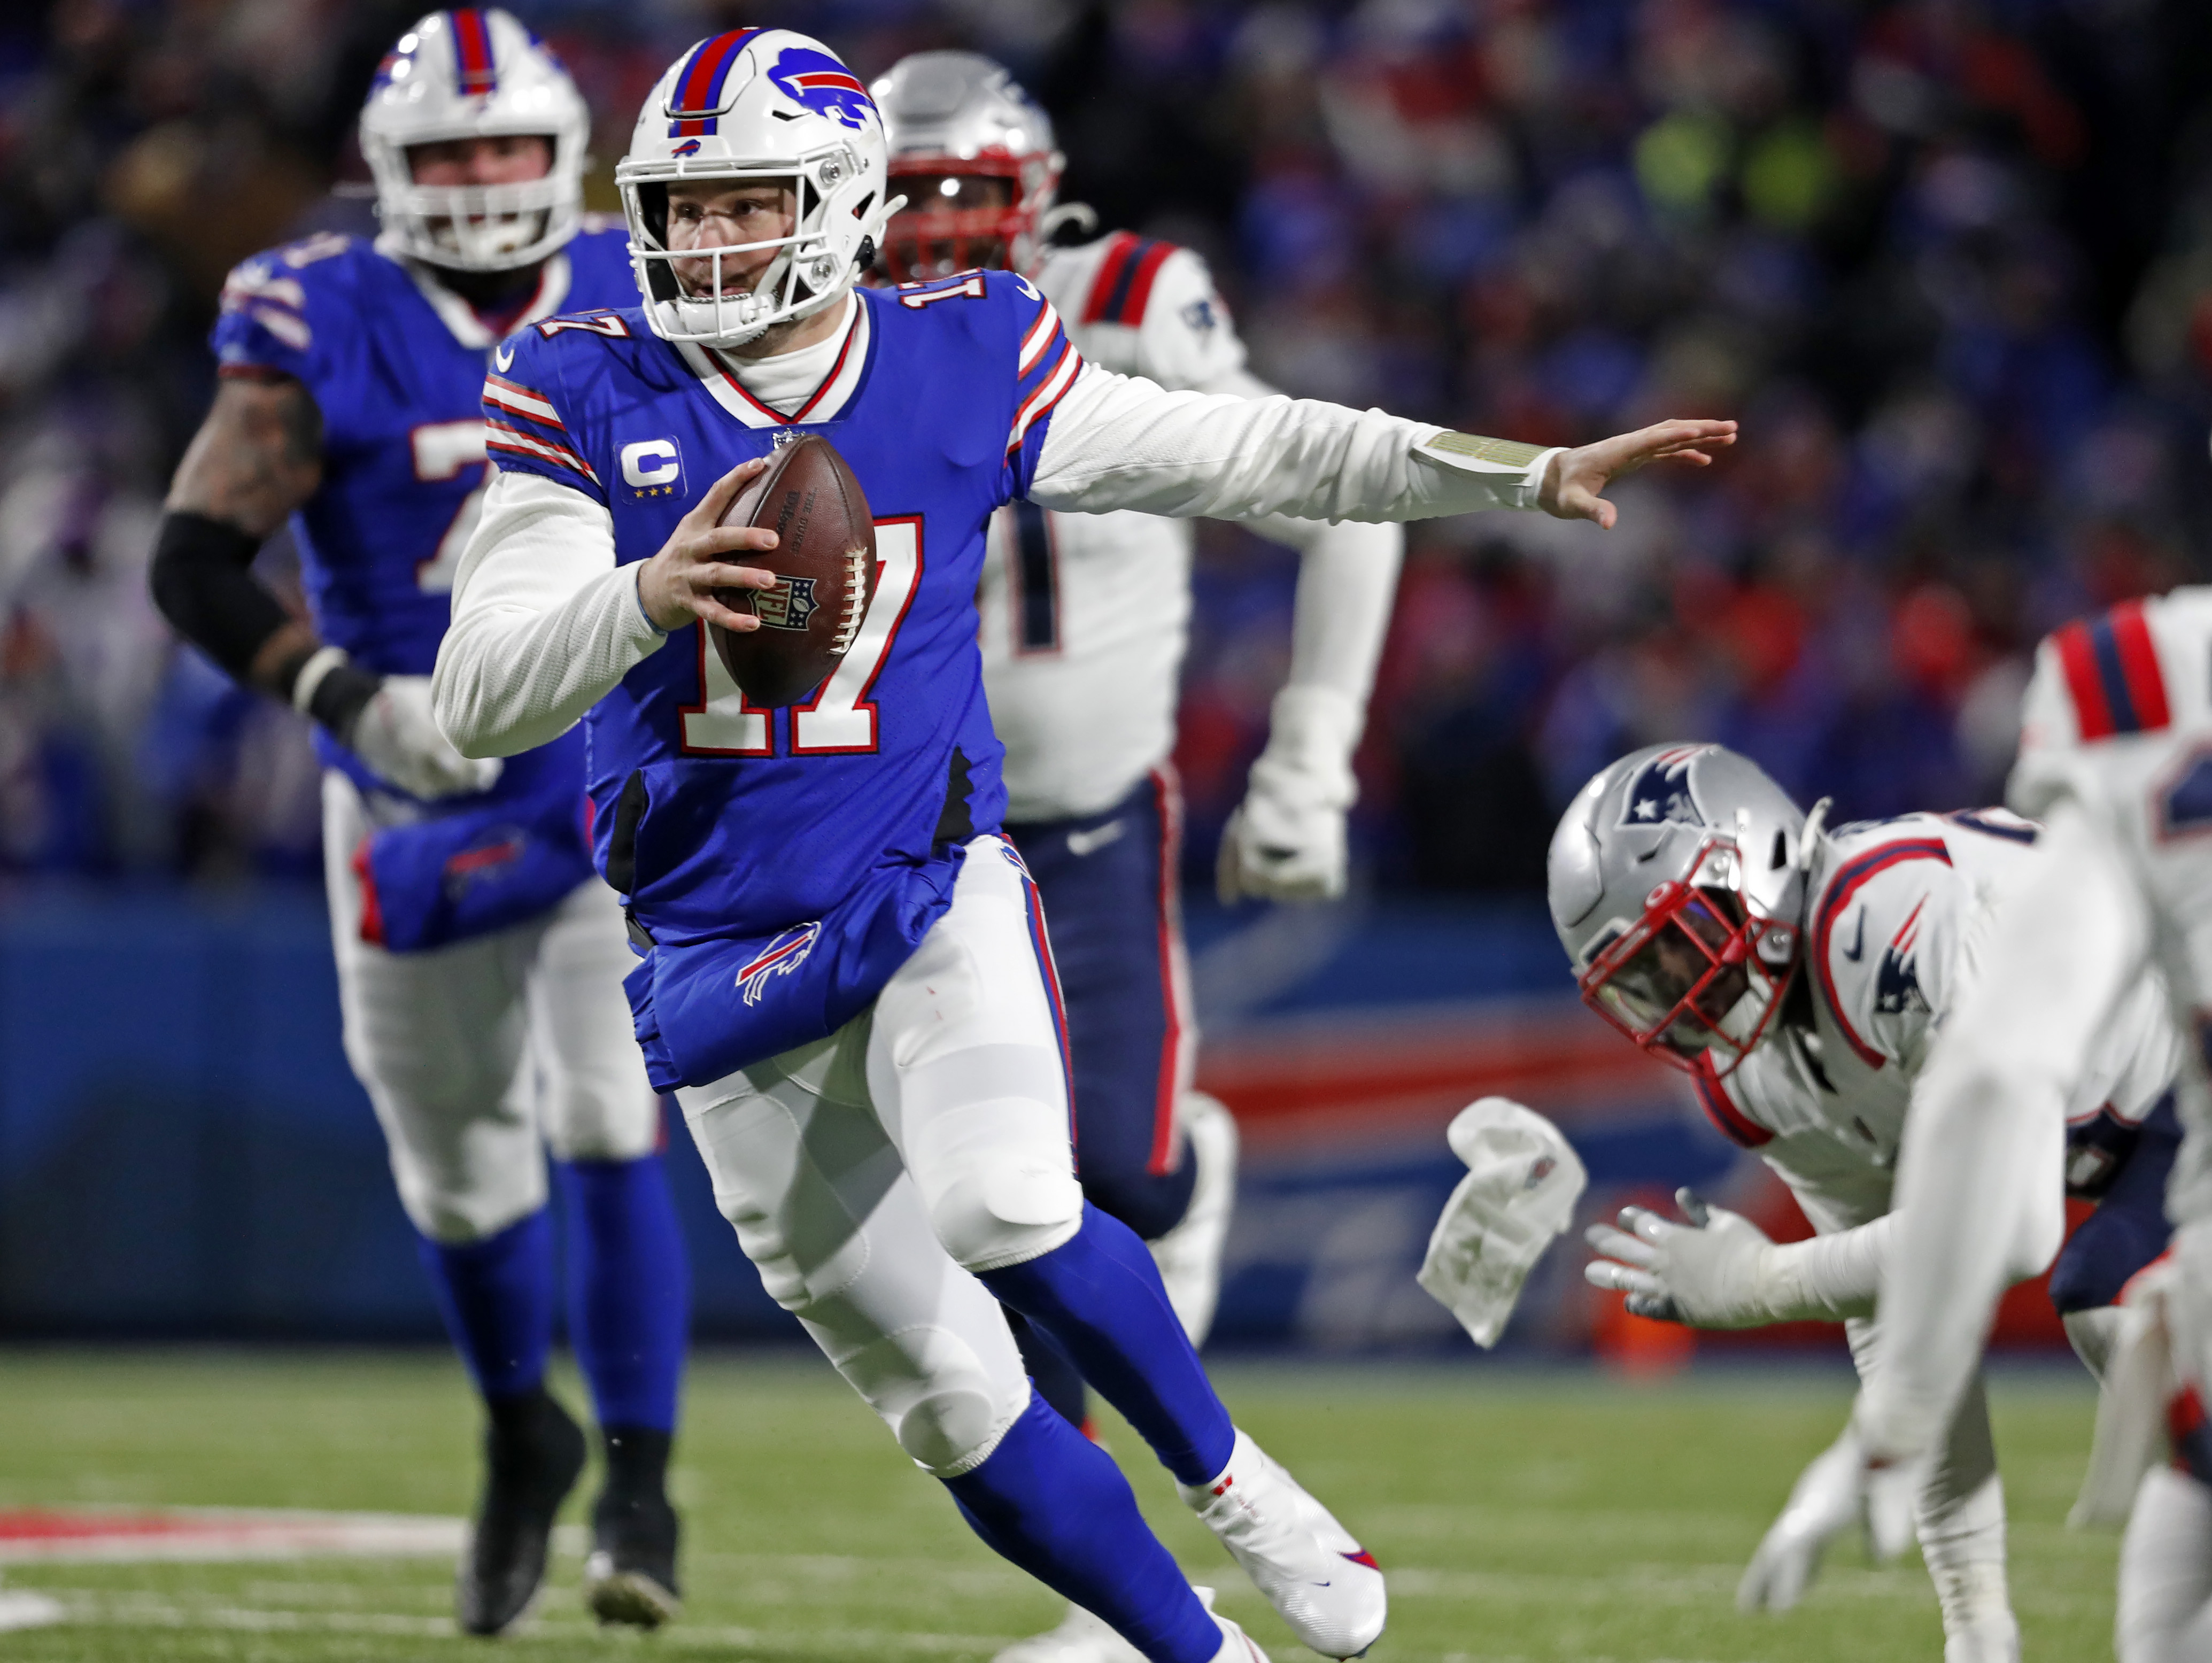 Going to Buffalo? Here's what you need to know head of playoff game